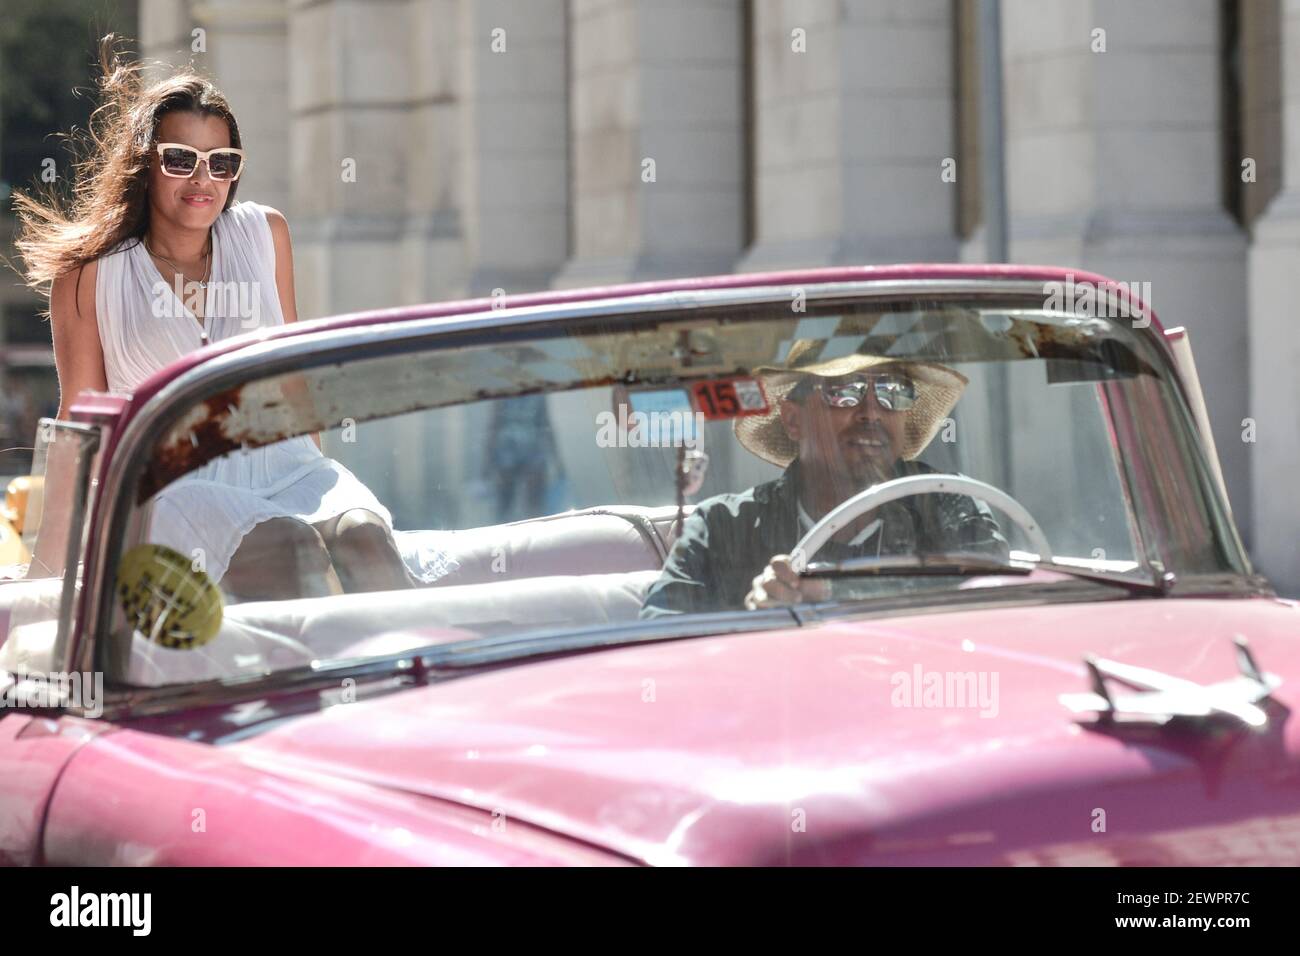 A tourist enjoys a ride inside an old american car, in Havana's city center. On Thursday, 1 December 2016, in Havana, Cuba. Photo by Artur Widak *** Please Use Credit from Credit Field ***  Stock Photo